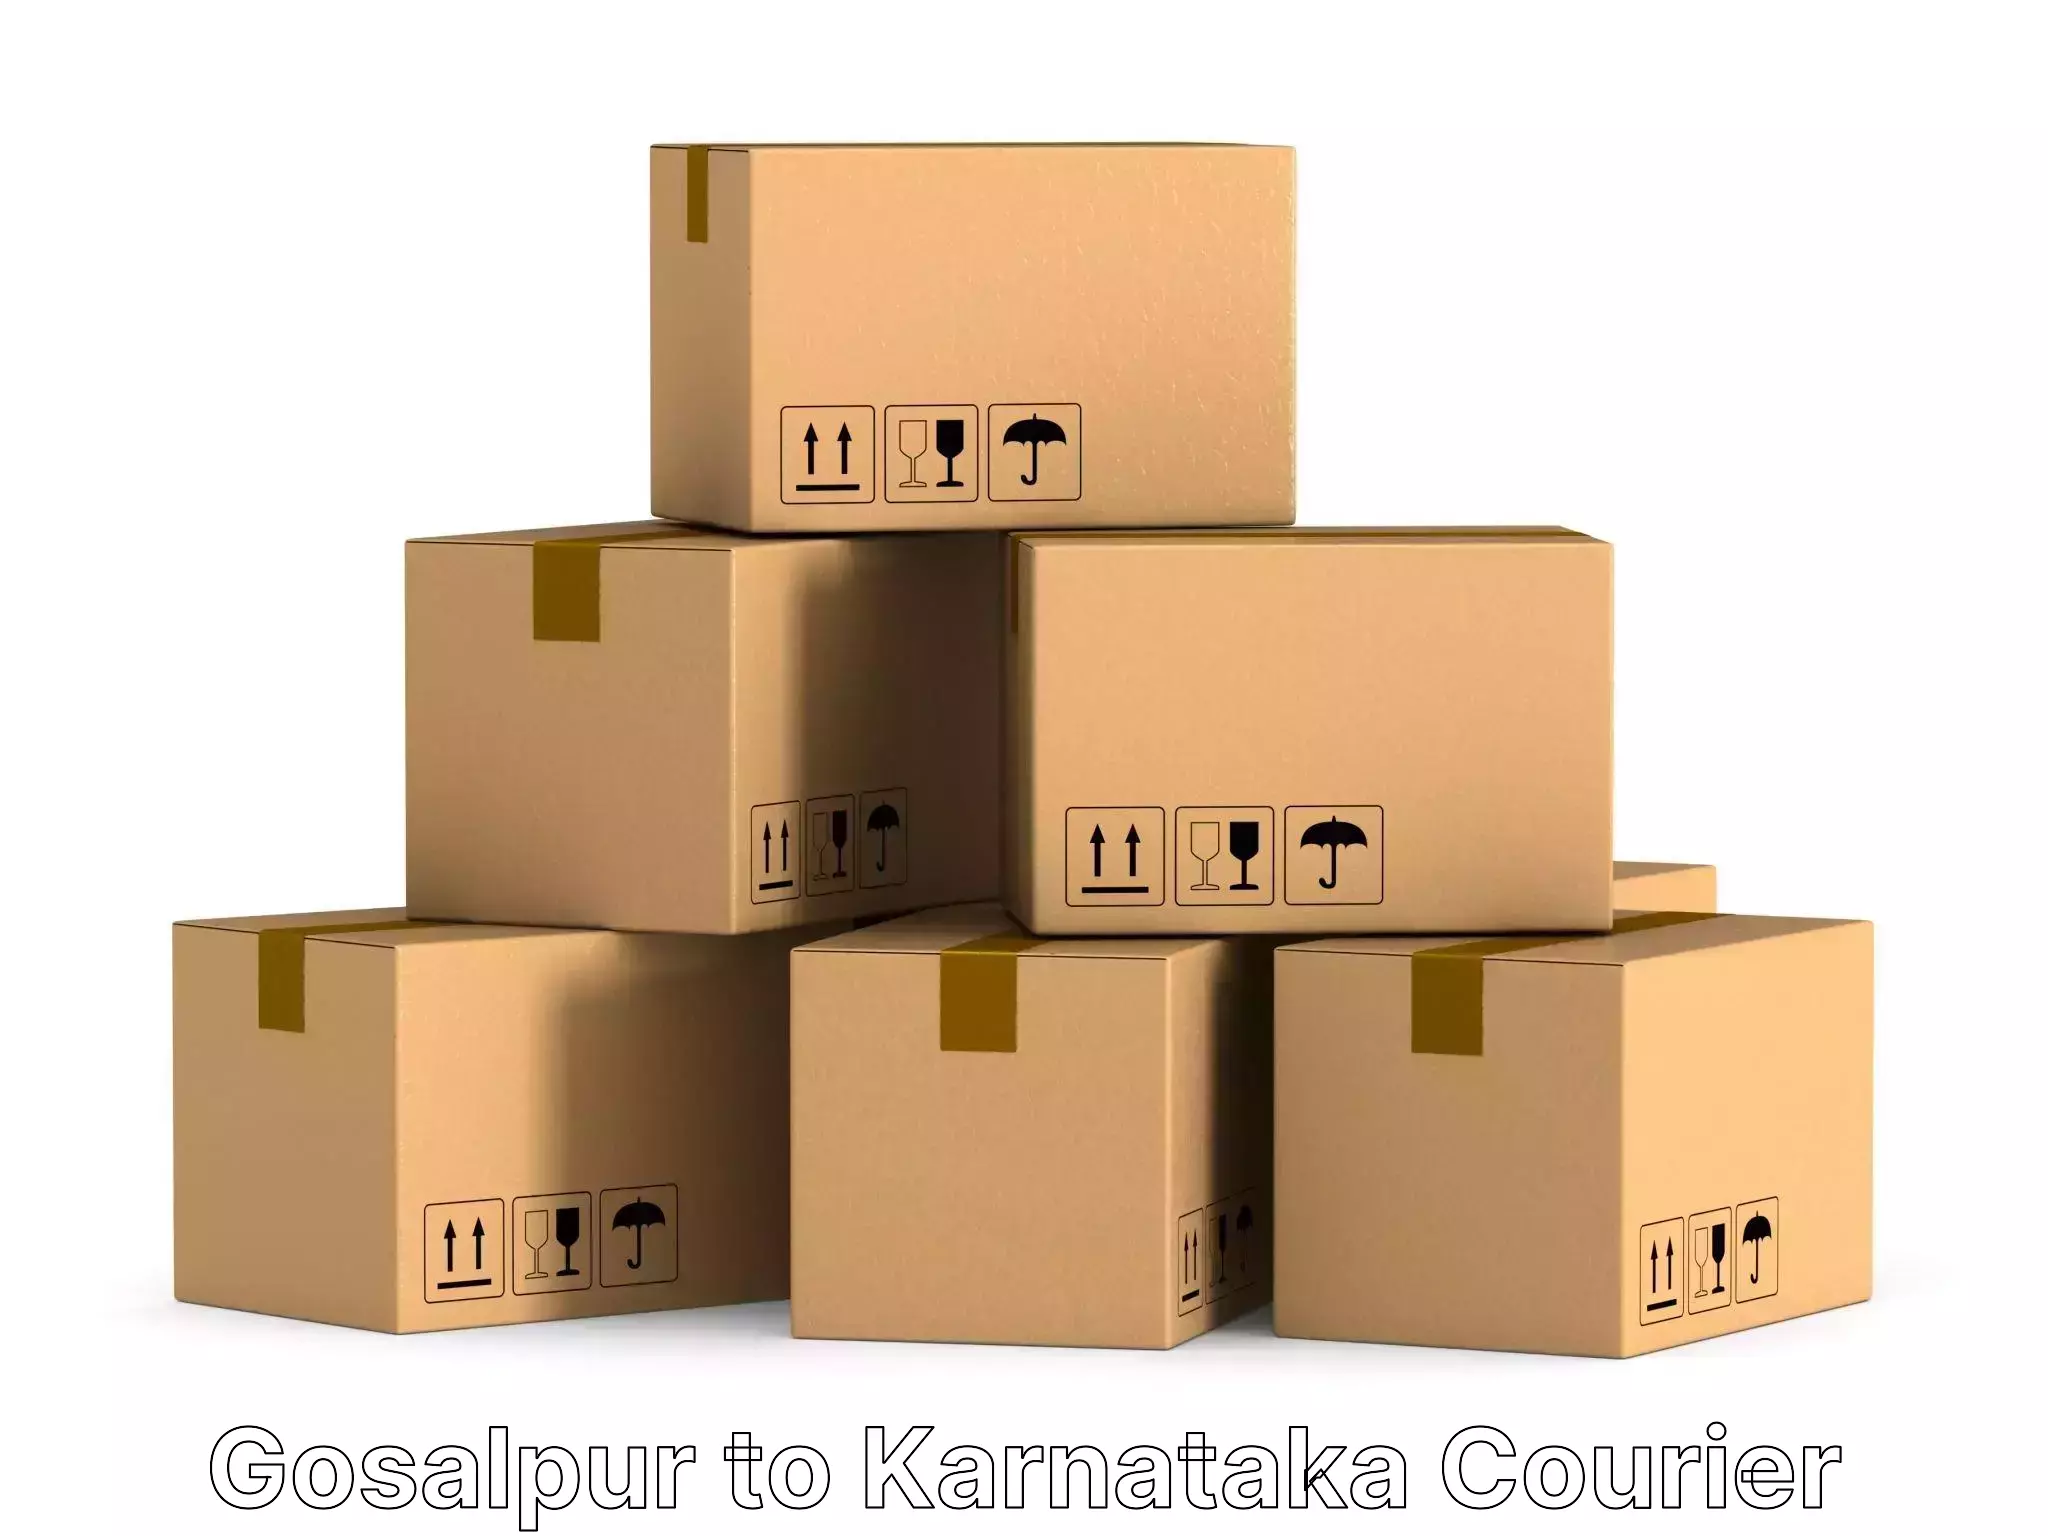 High-quality moving services in Gosalpur to Madhugiri